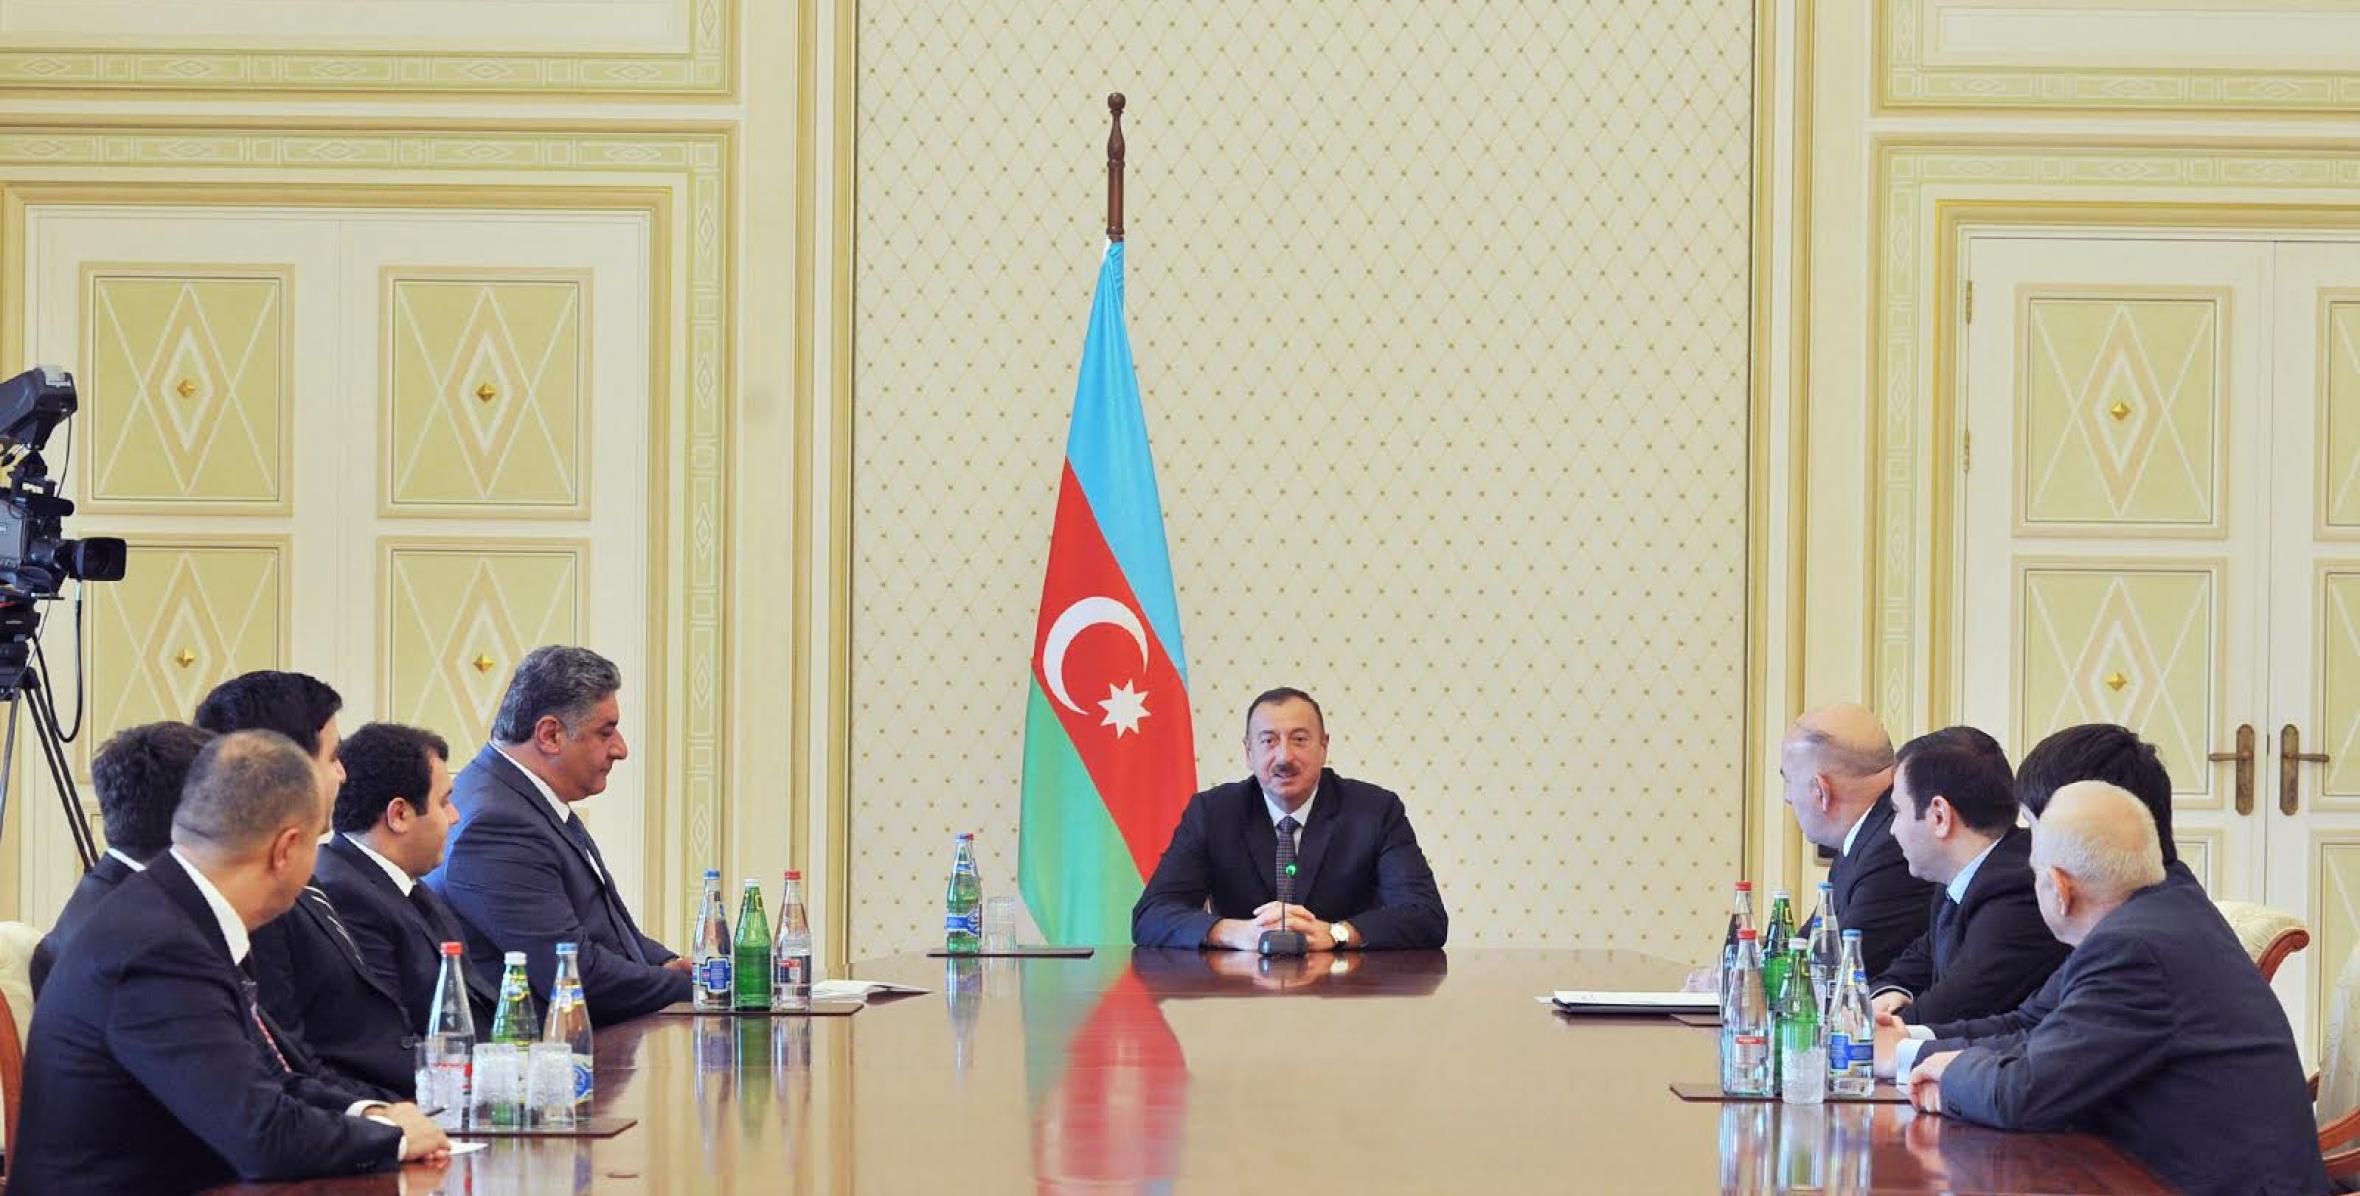 Ilham Aliyev received members of the national men's team of Azerbaijan, who took first place at the European Team Chess Championship, and specialists